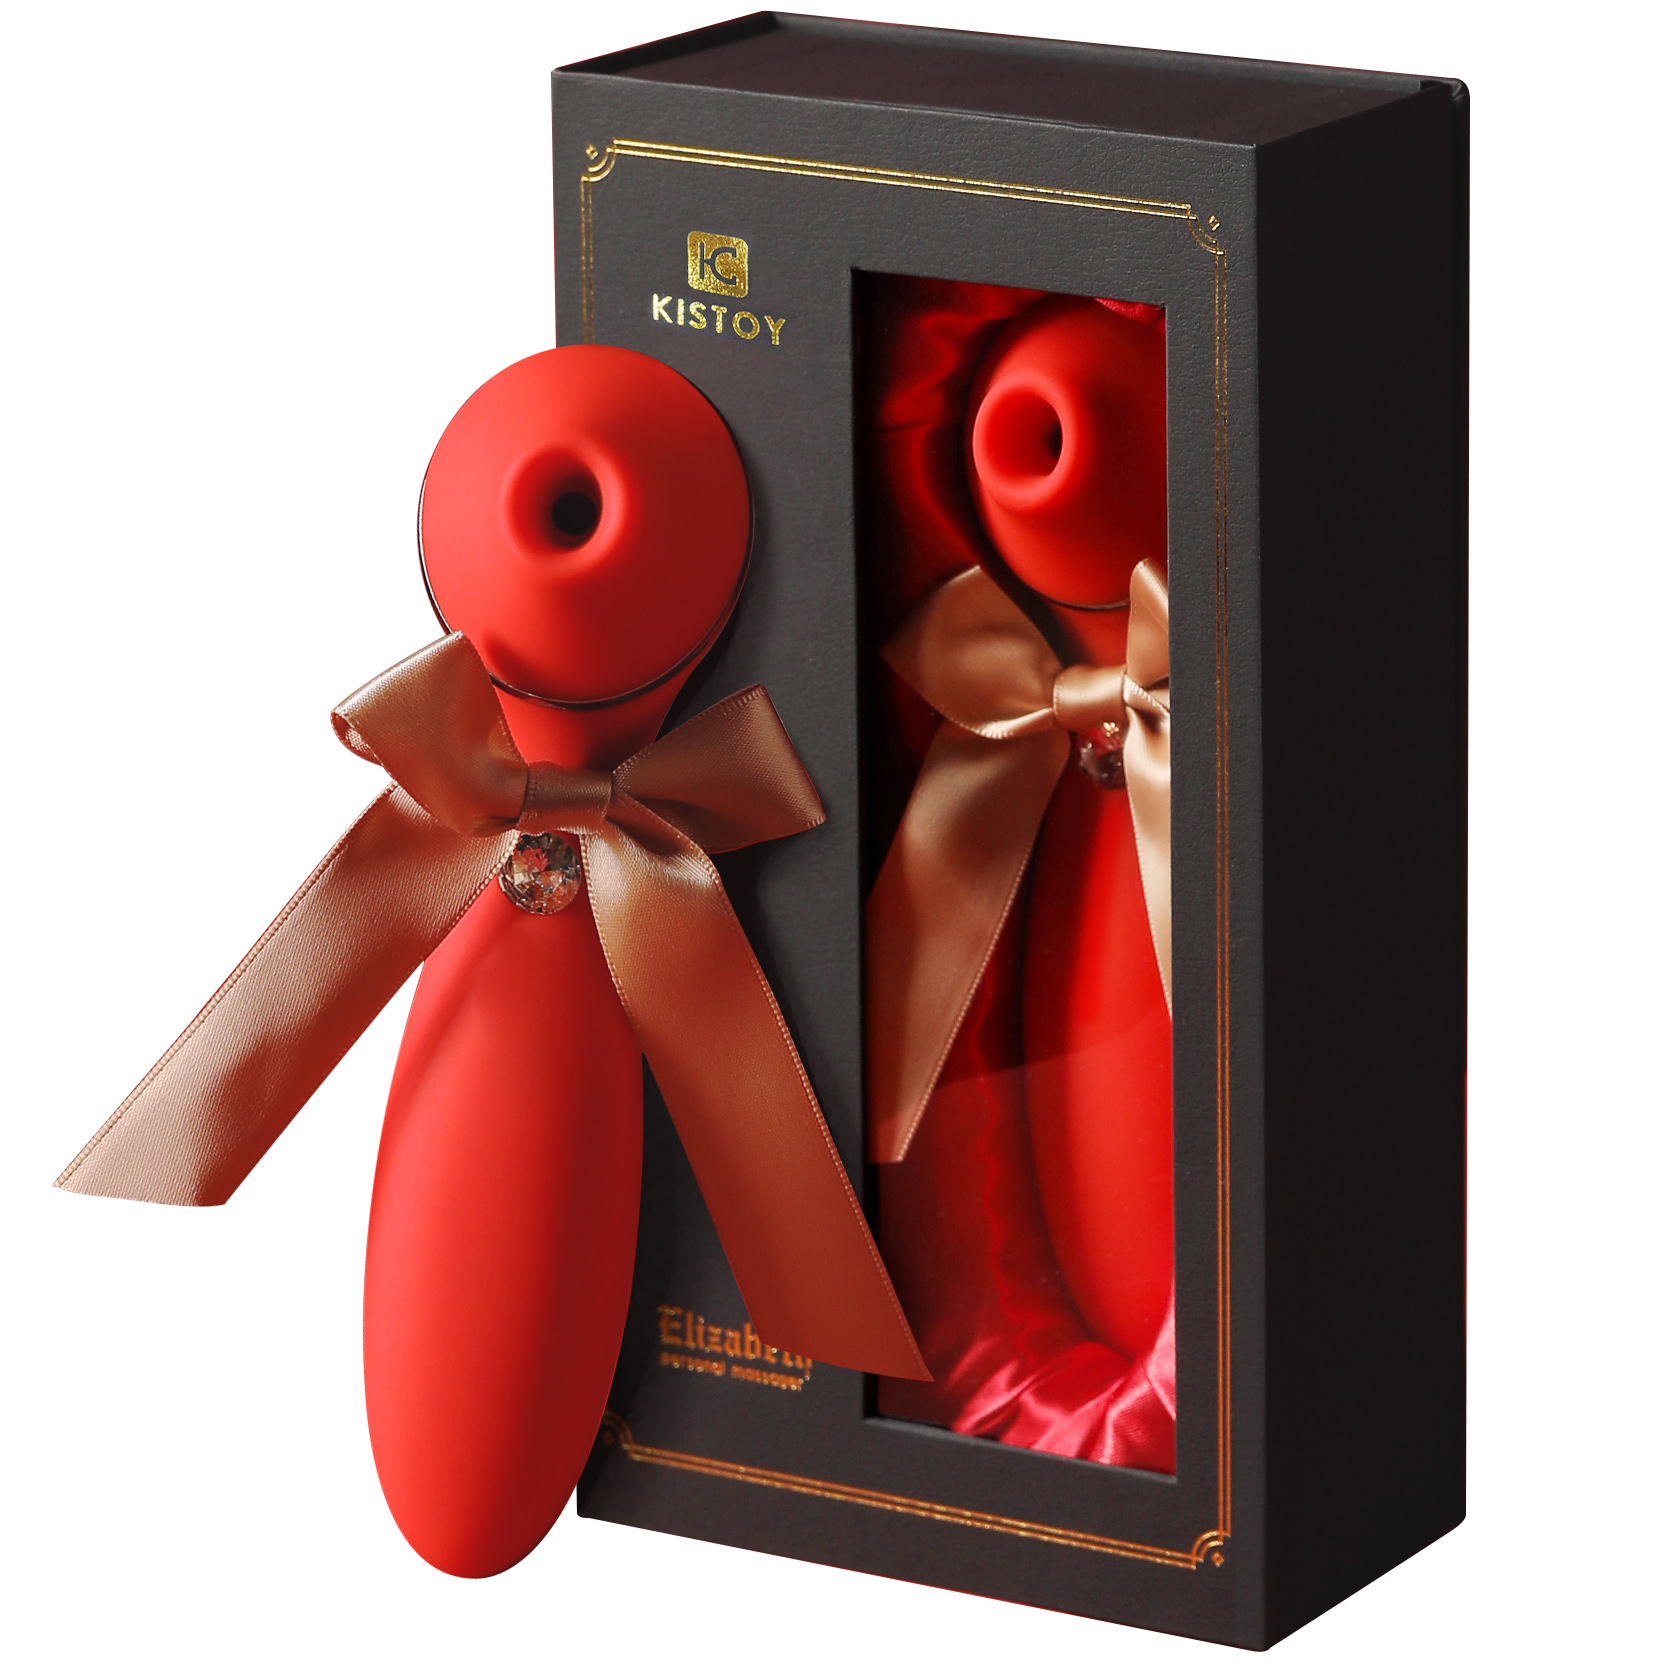 Elizabeth Heated Vibrating Wands for Women Luxuriou Sex Toys with Premium Quality Red-Lovevib